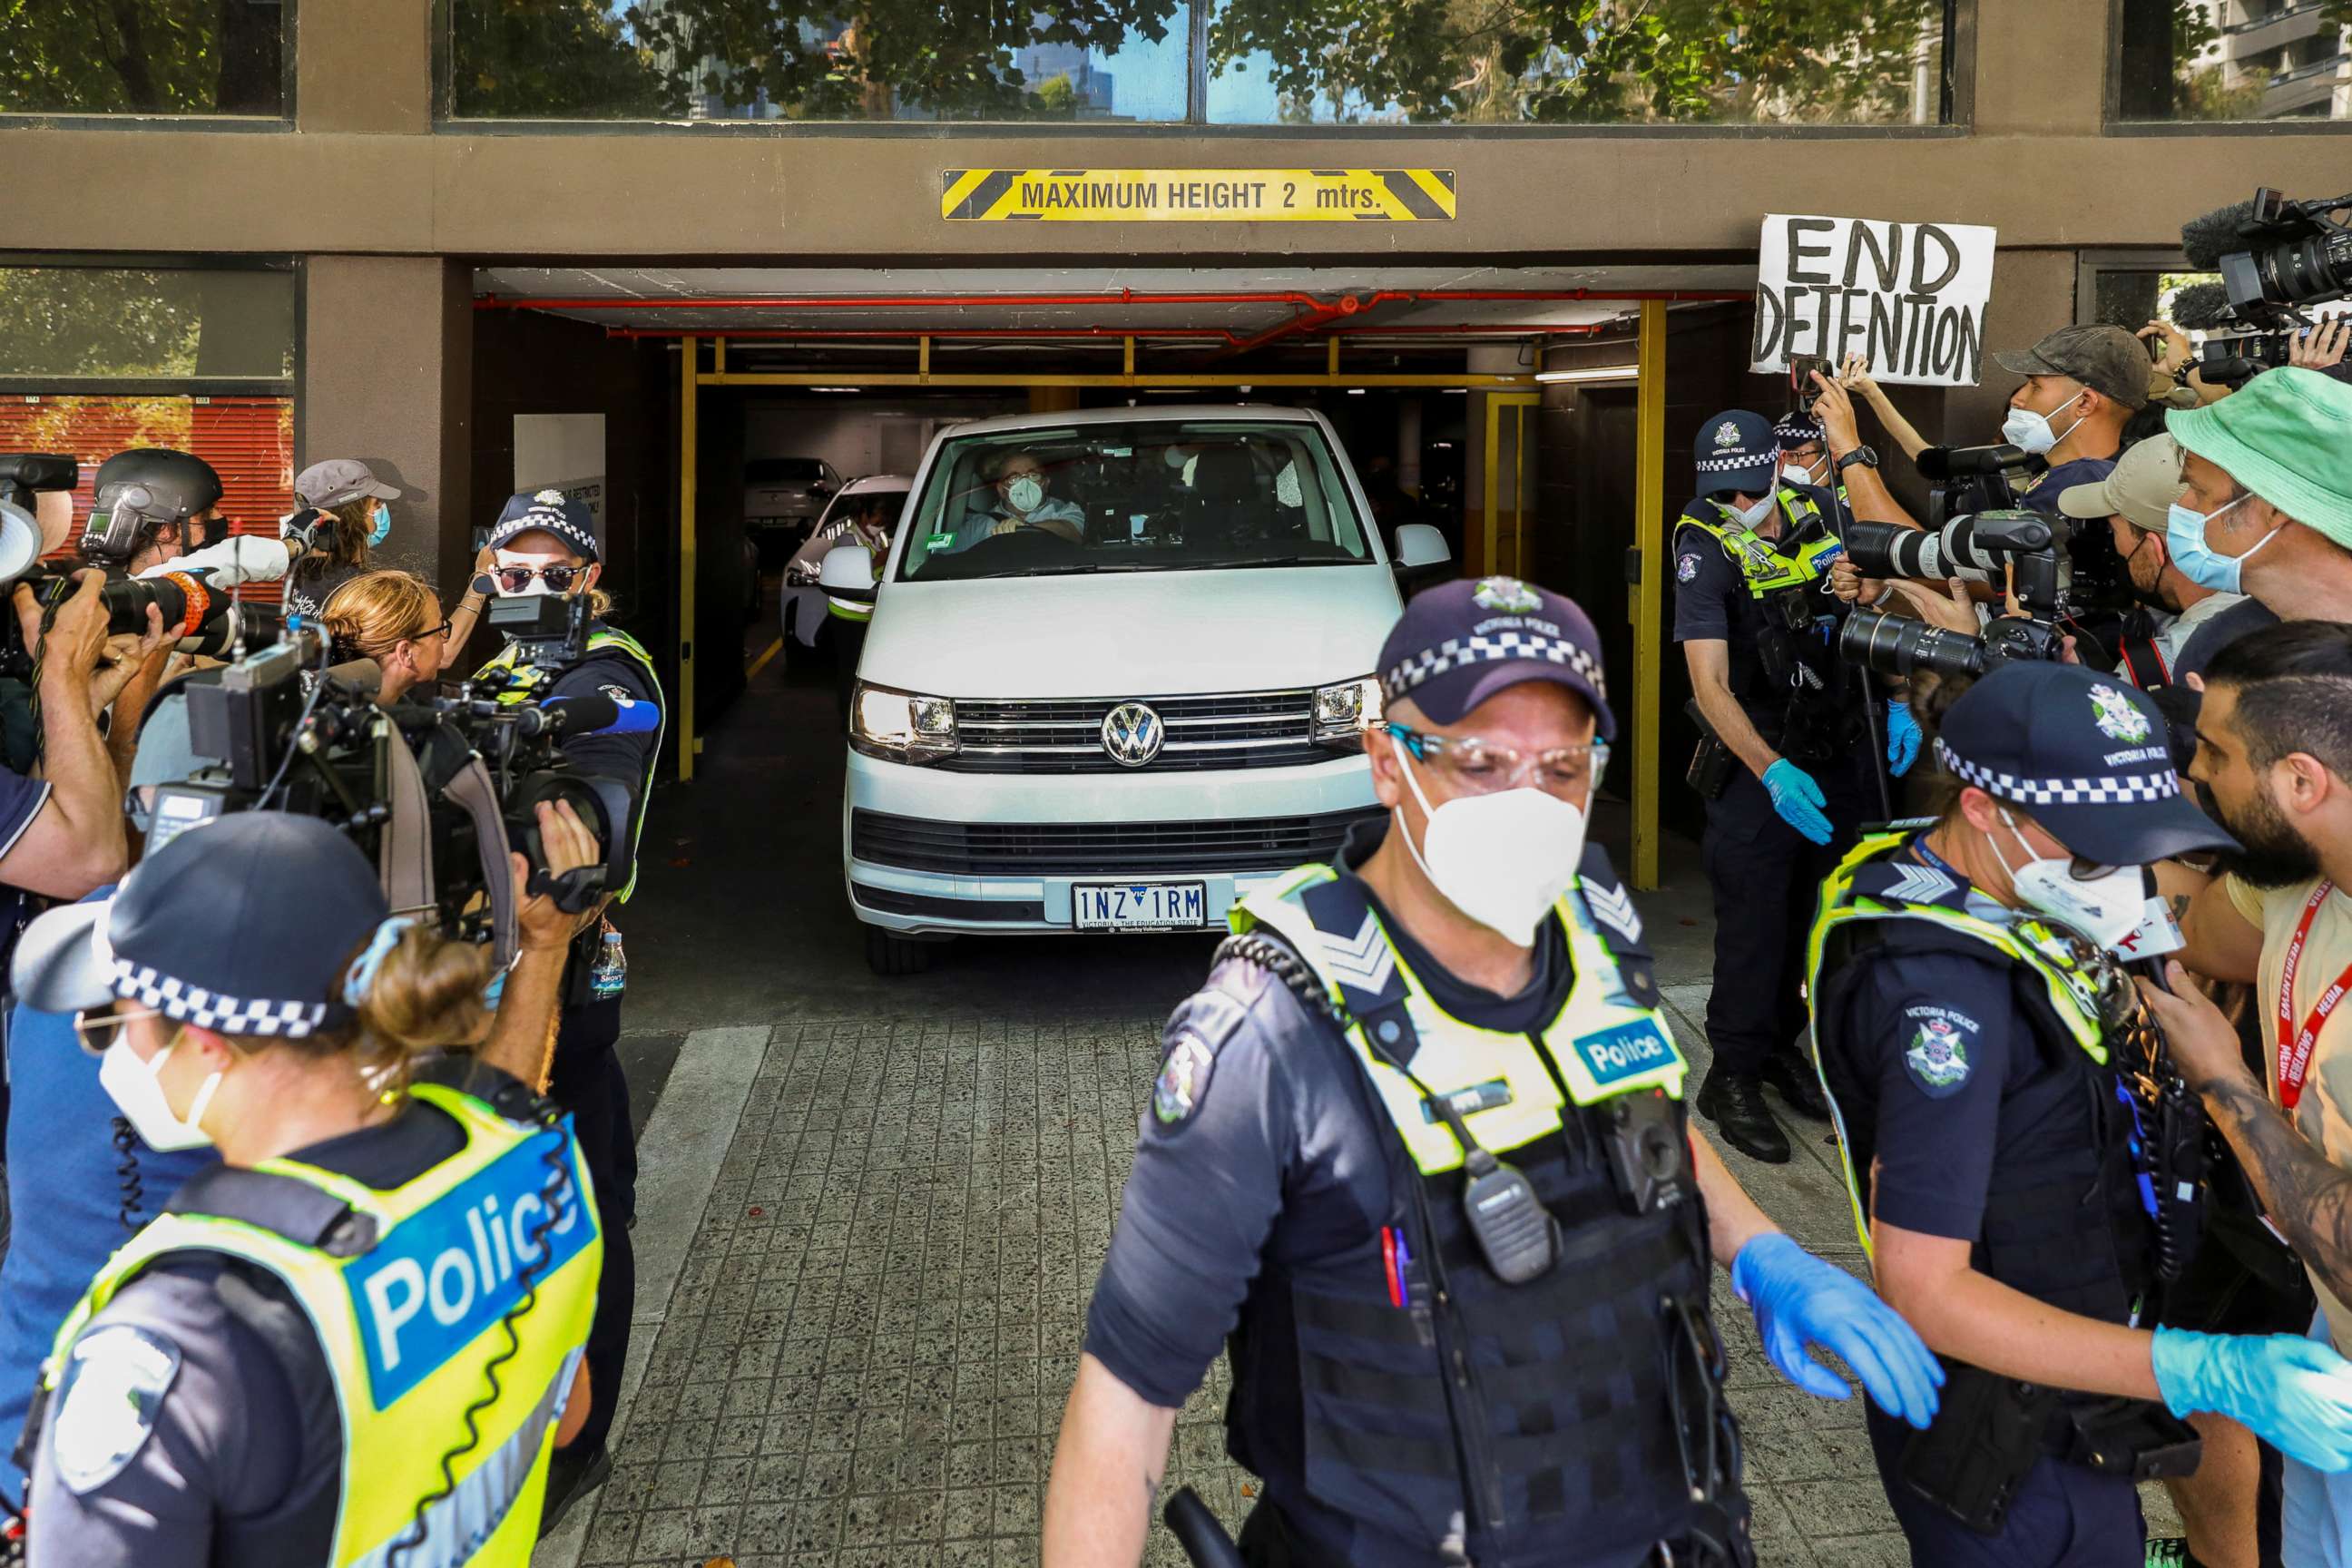 PHOTO: Members of the media waiting for a sighting of Serbian tennis player Novak Djokovic surround a departing transport vehicle exiting the Park Hotel in Melbourne, Australia, on Jan. 10, 2022.